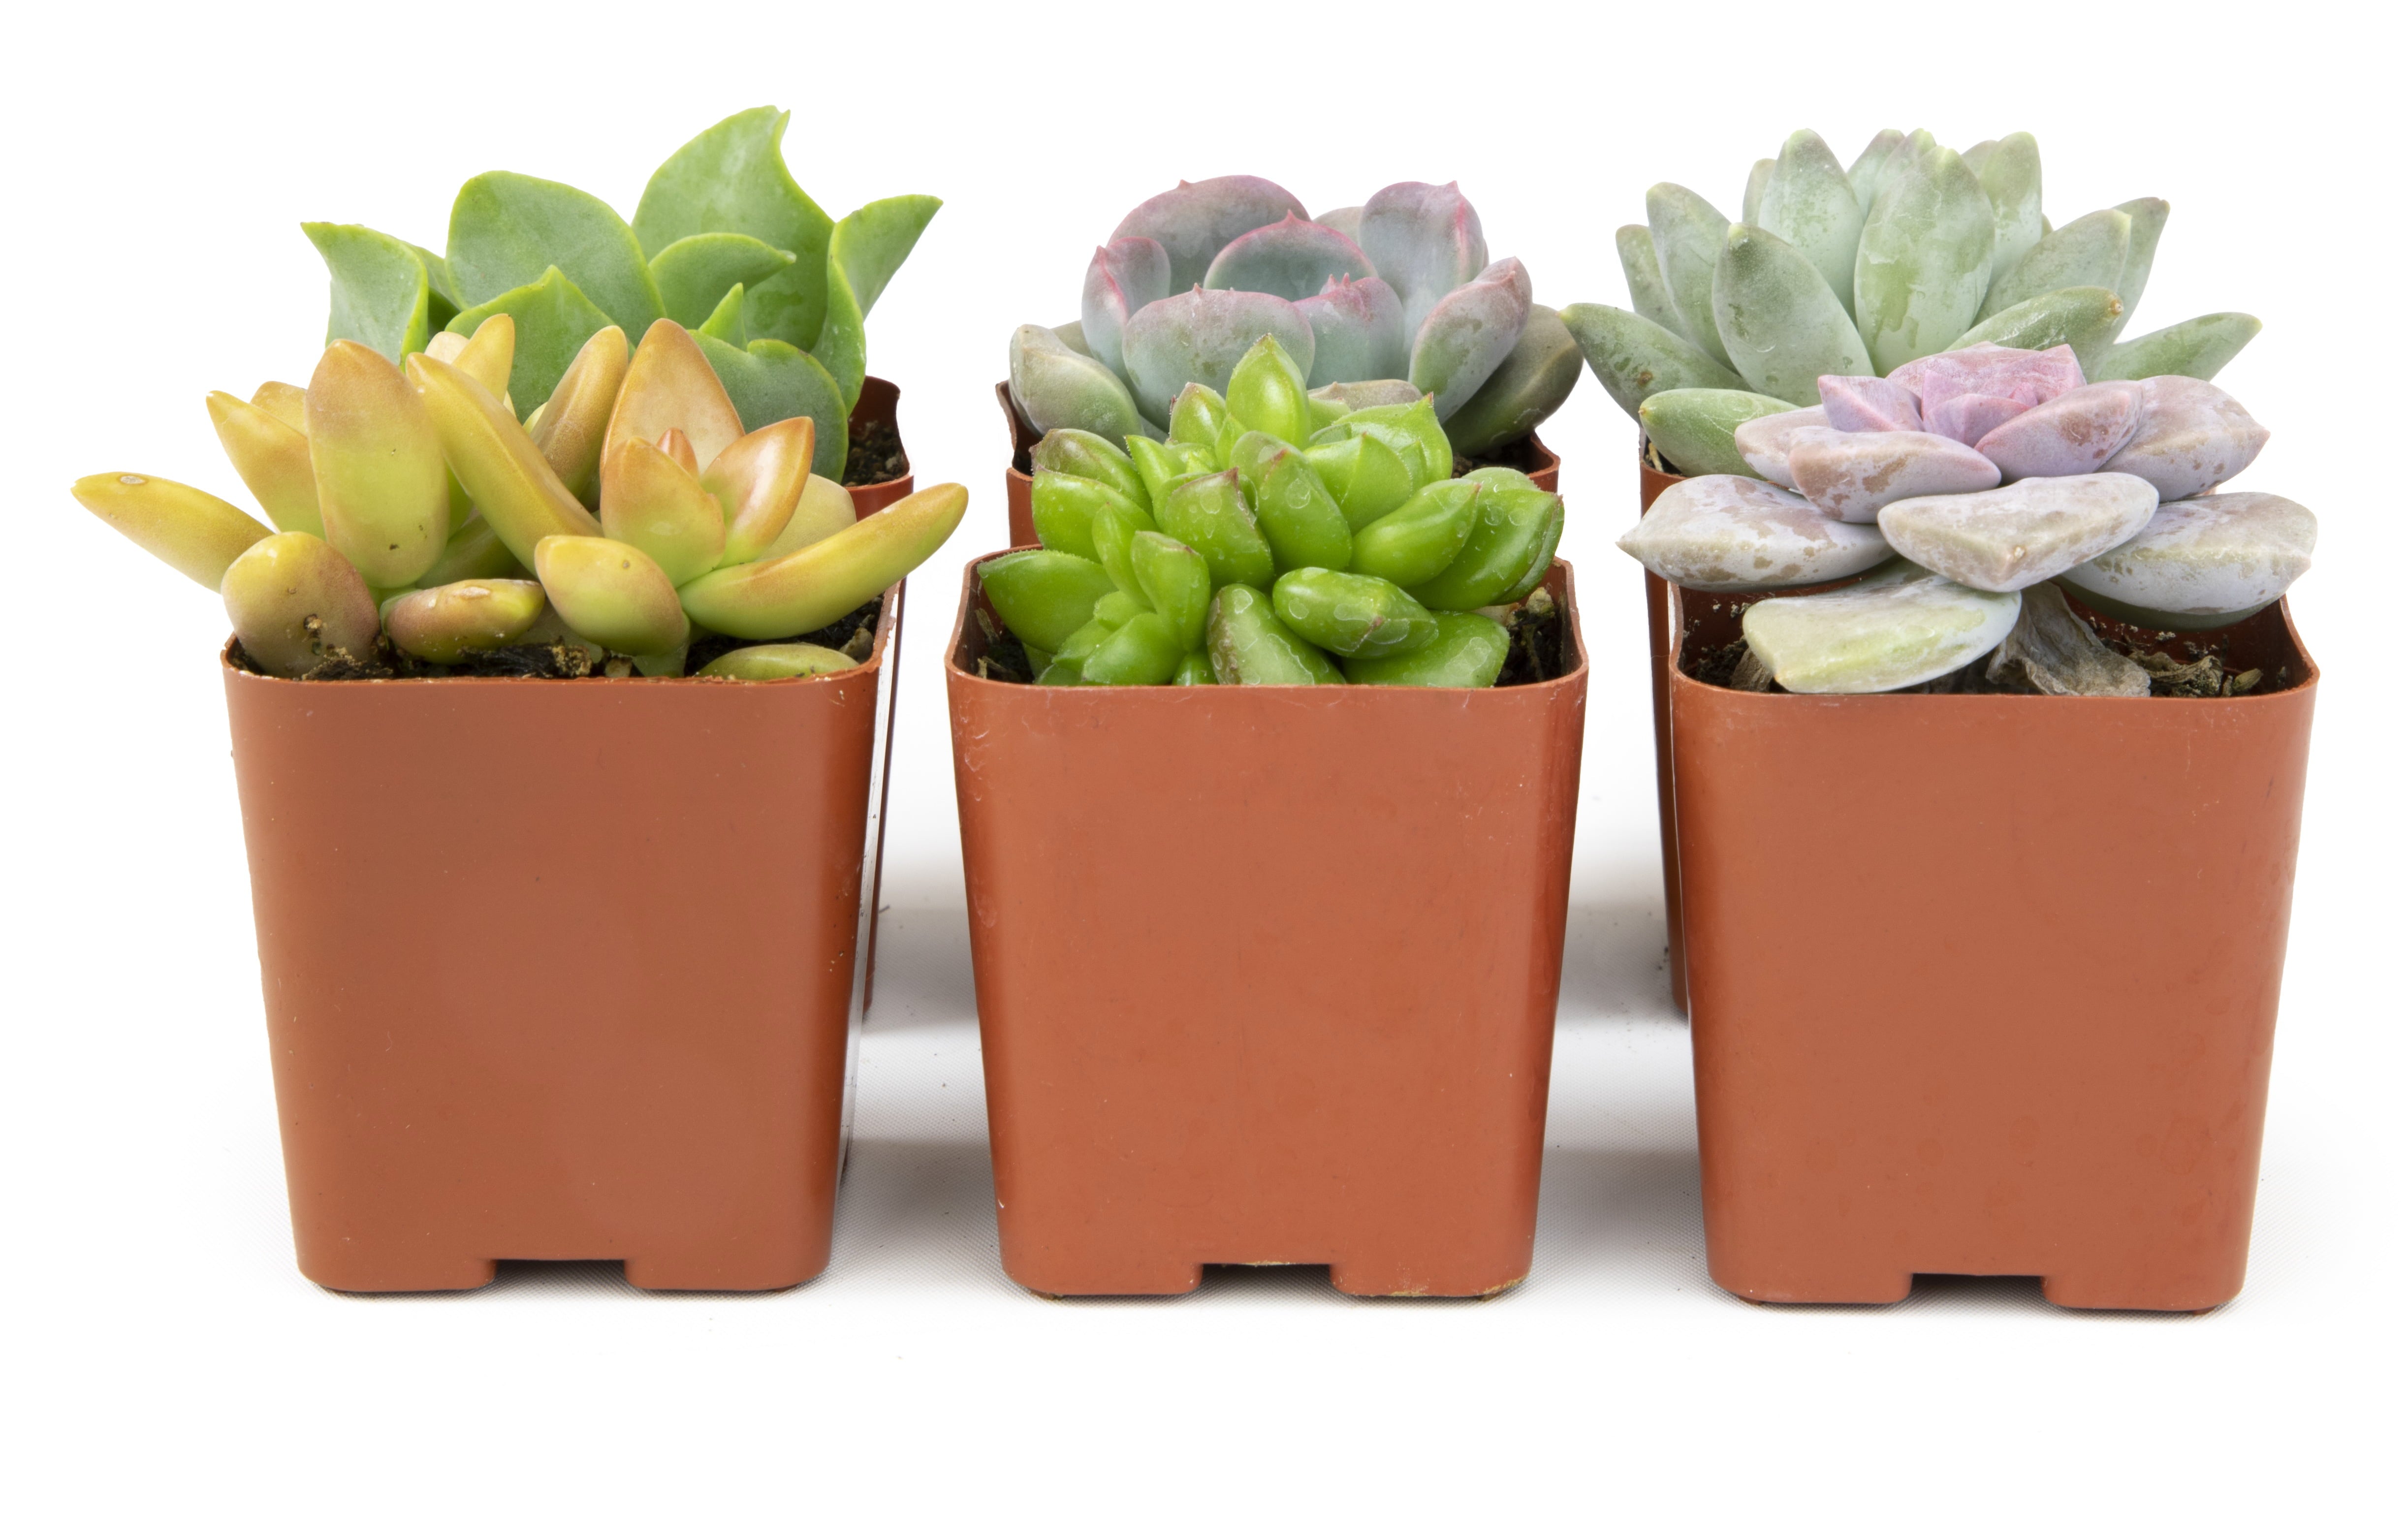 Element by Altman Plants Multicolor Succulent， Live Indoor House Plants with Grower Pots ， 2 inch ， Pack of 6